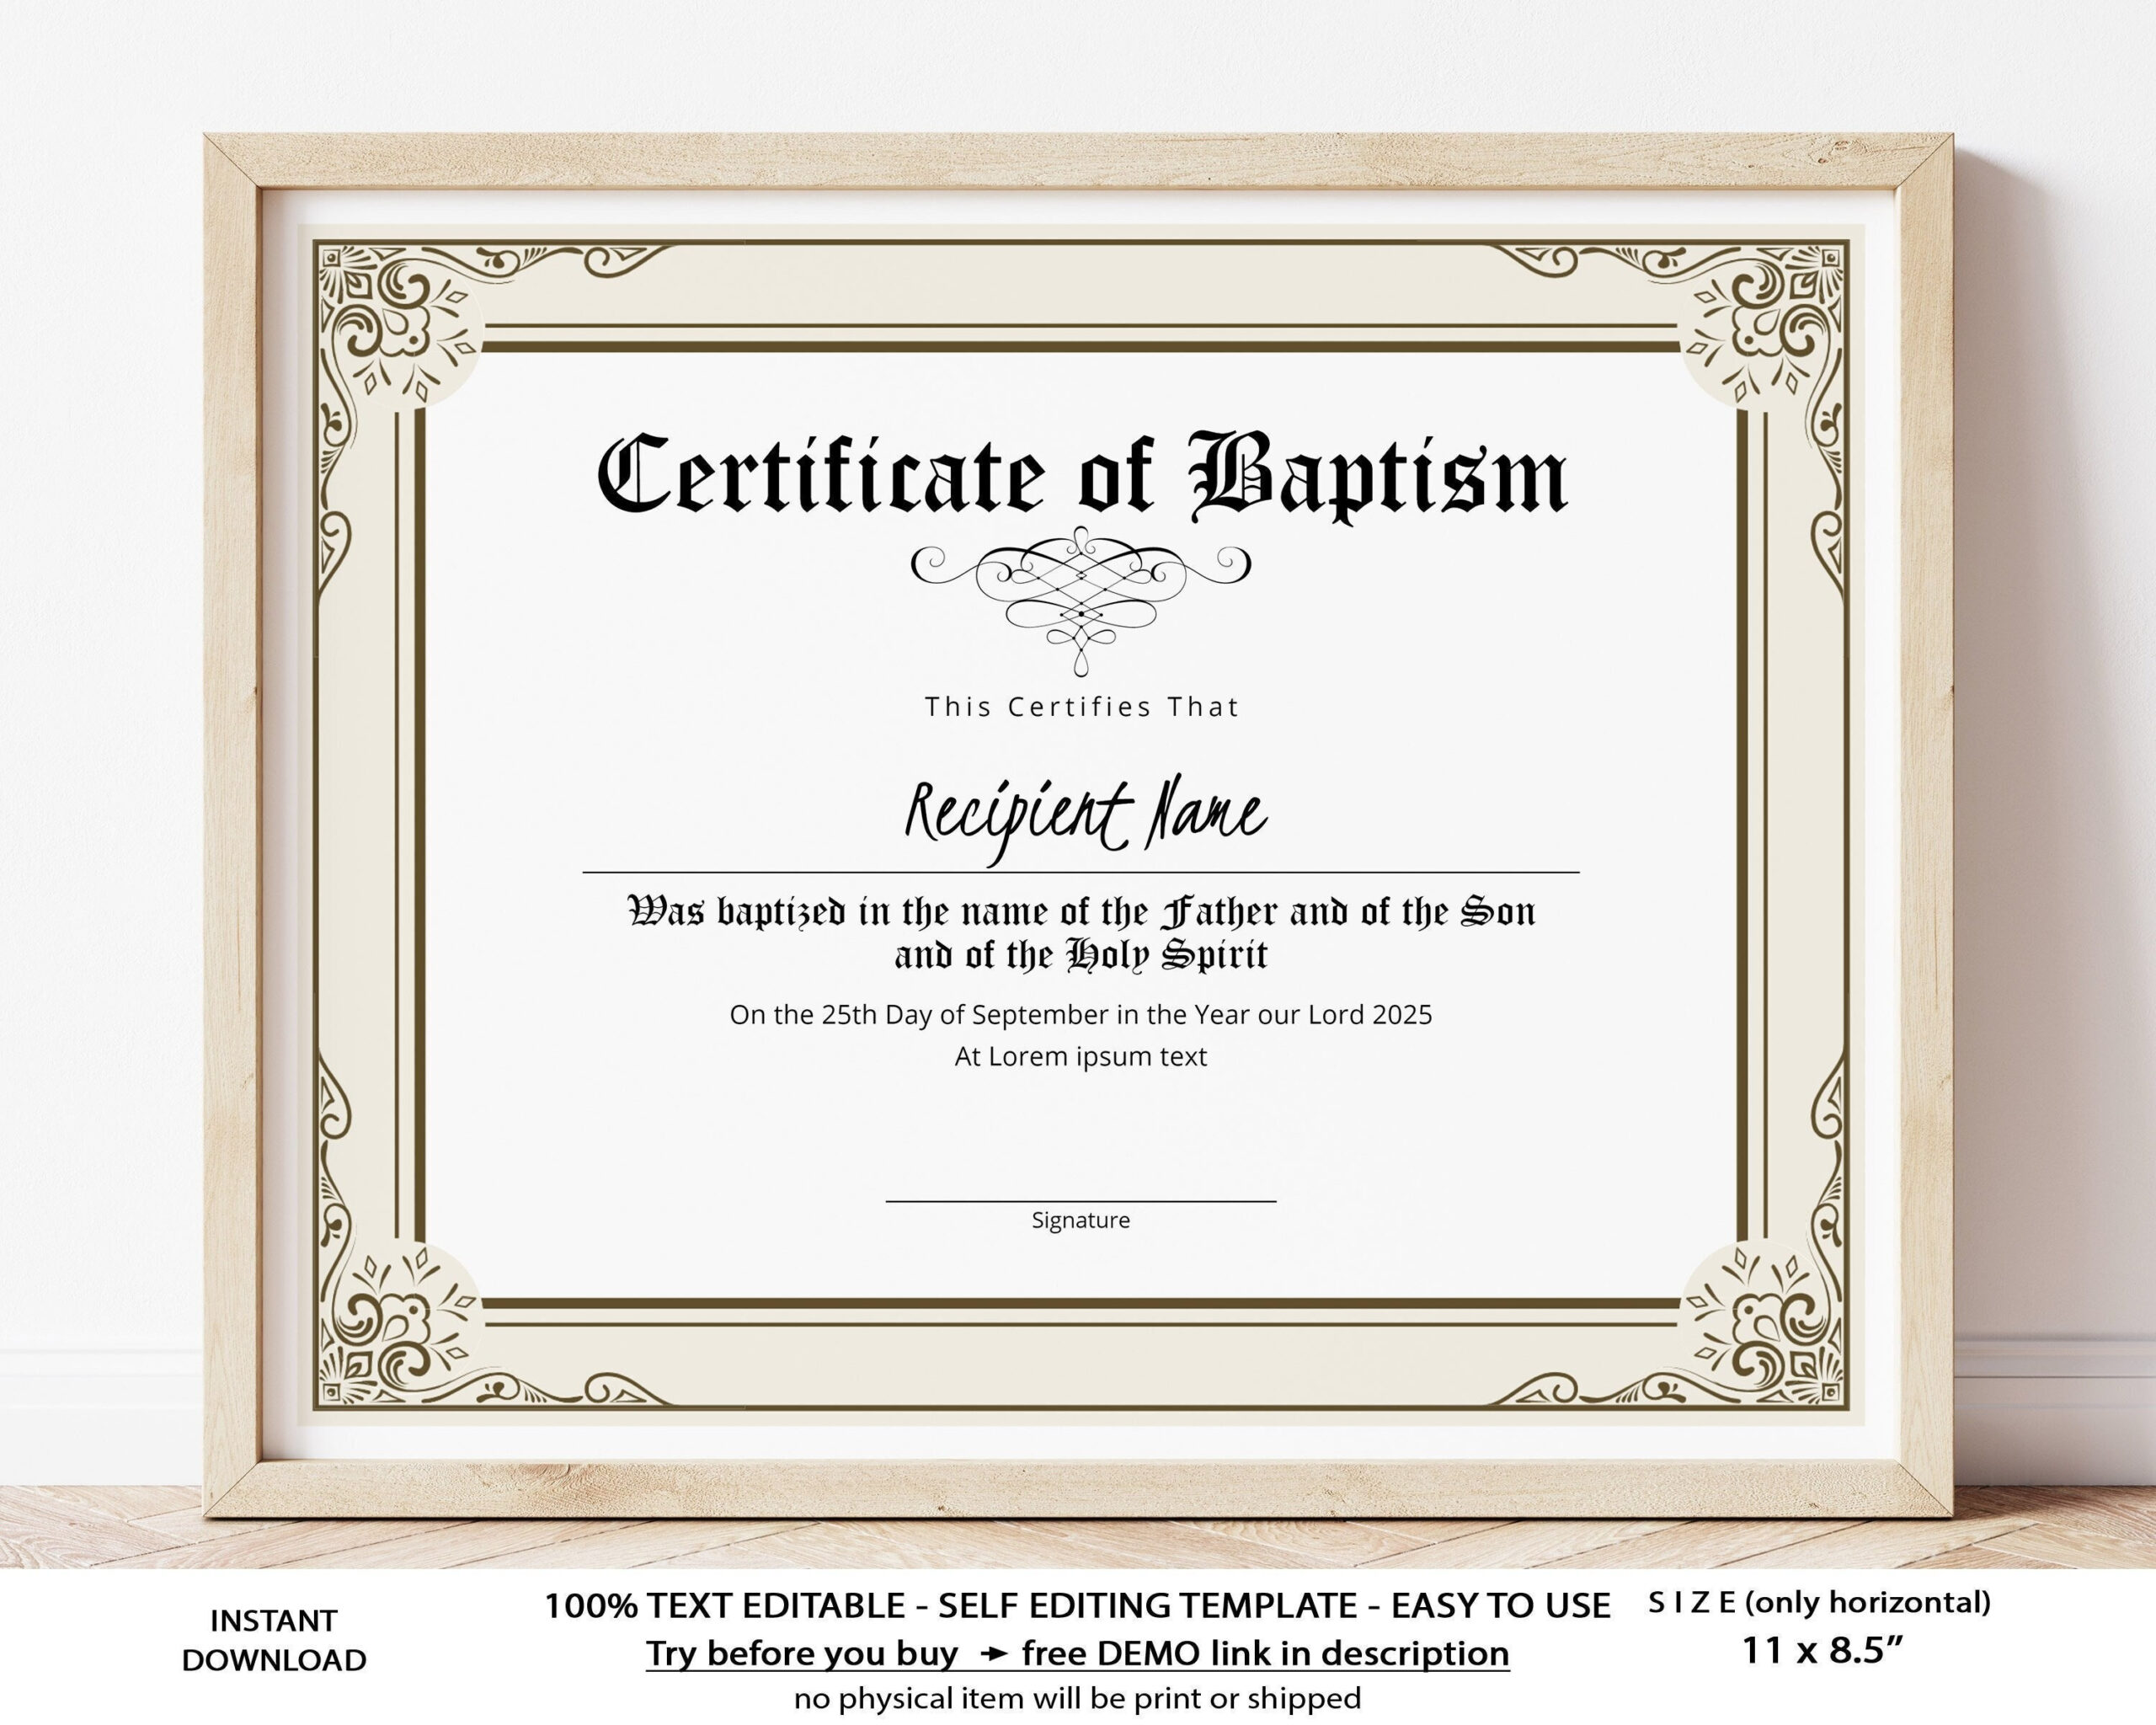 Editable Certificate of Baptism Template Printable Church - Etsy